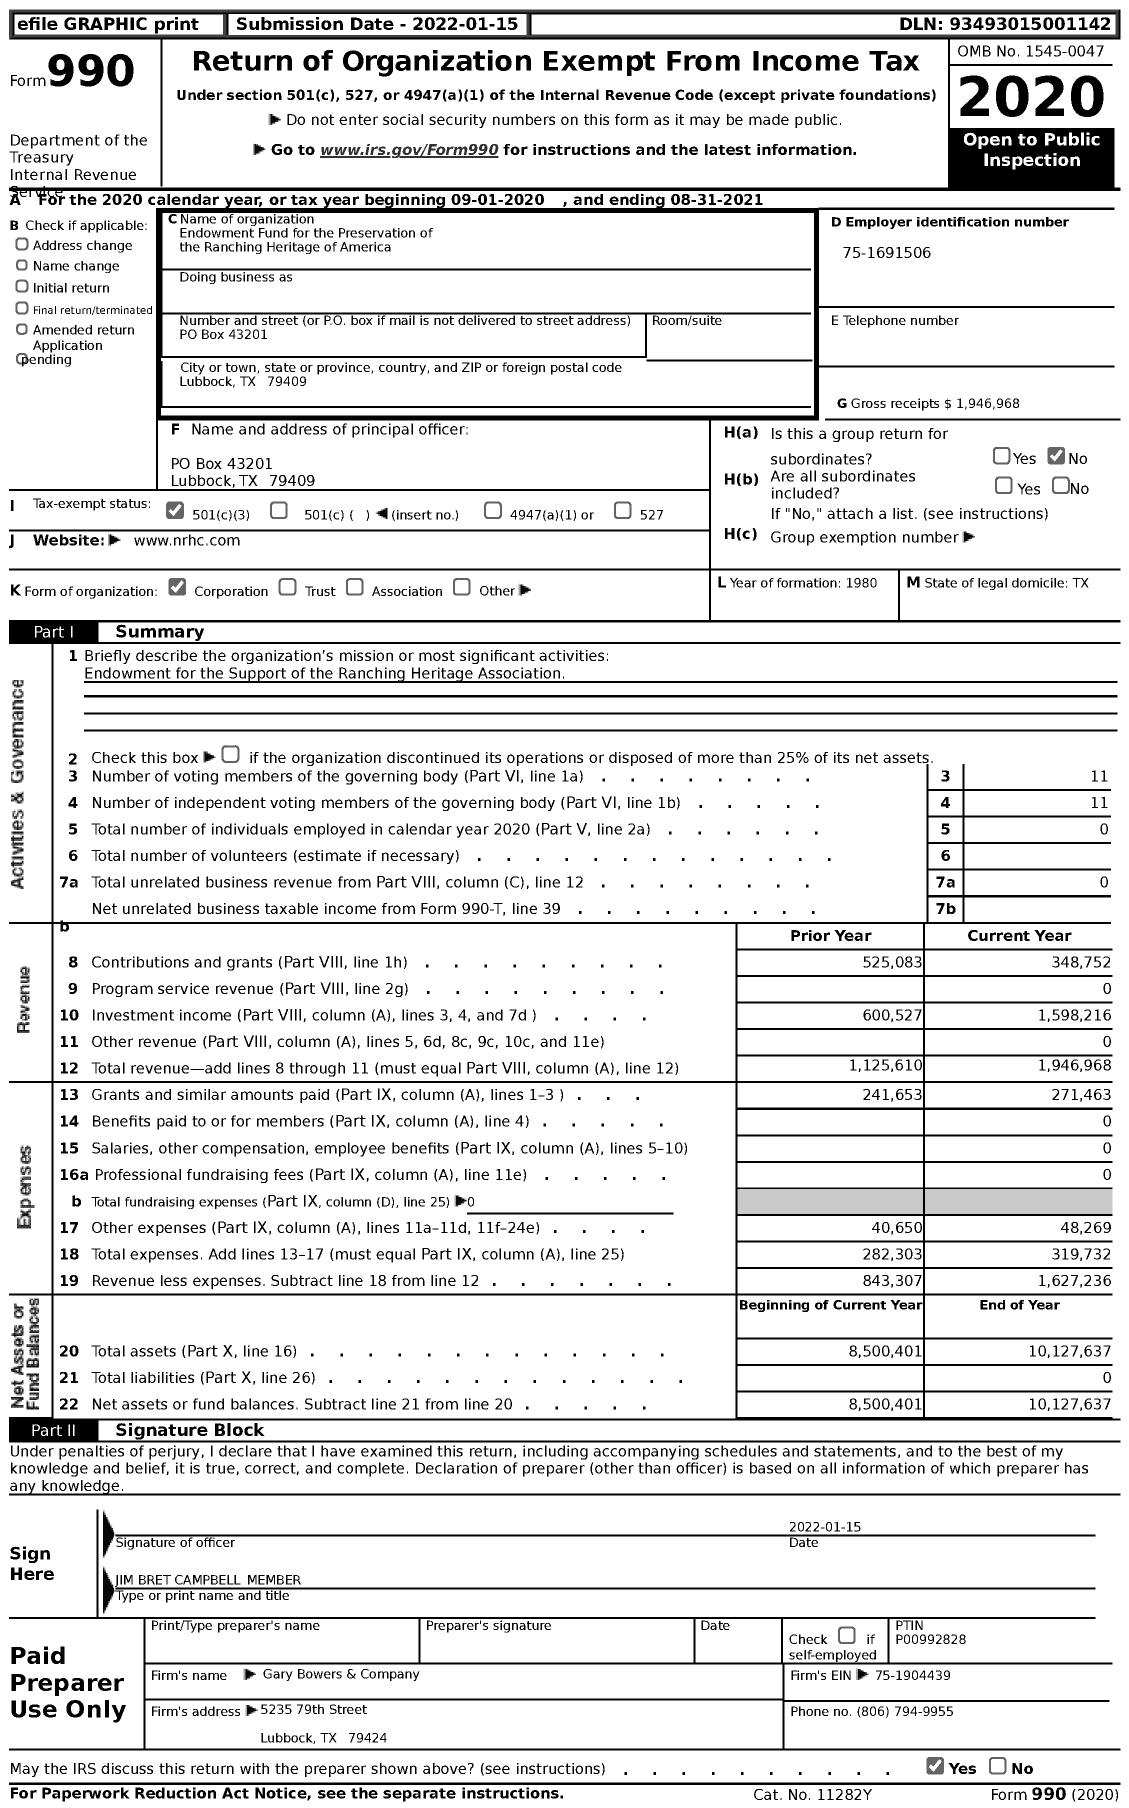 Image of first page of 2020 Form 990 for Endowment Fund for the Preservation of the Ranching Heritage of America